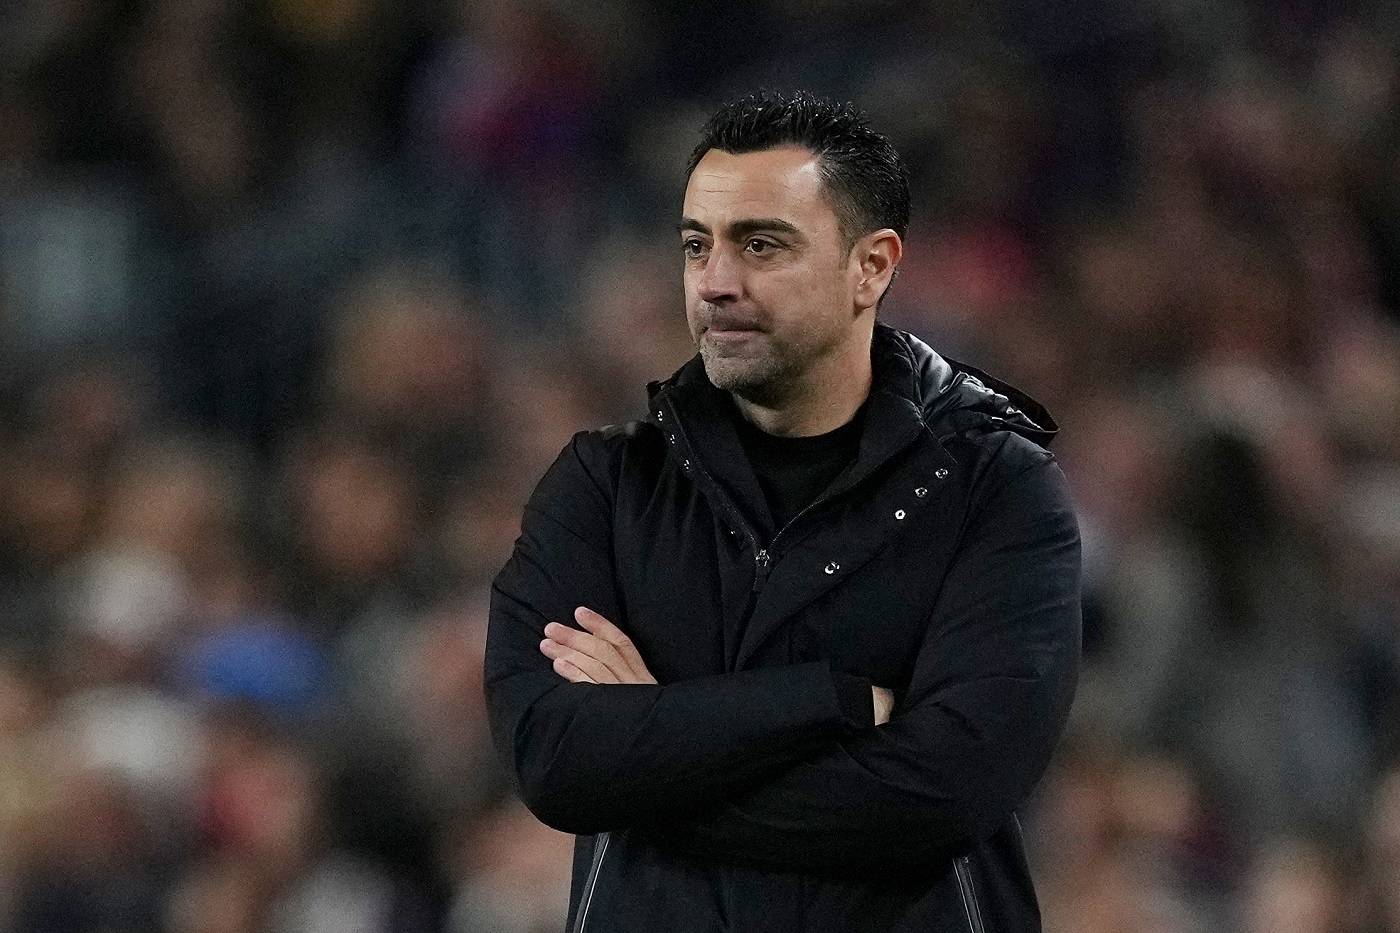 Xavi Hernandez acknowledges that Barcelona have made a “giant step” in Osasuna victory